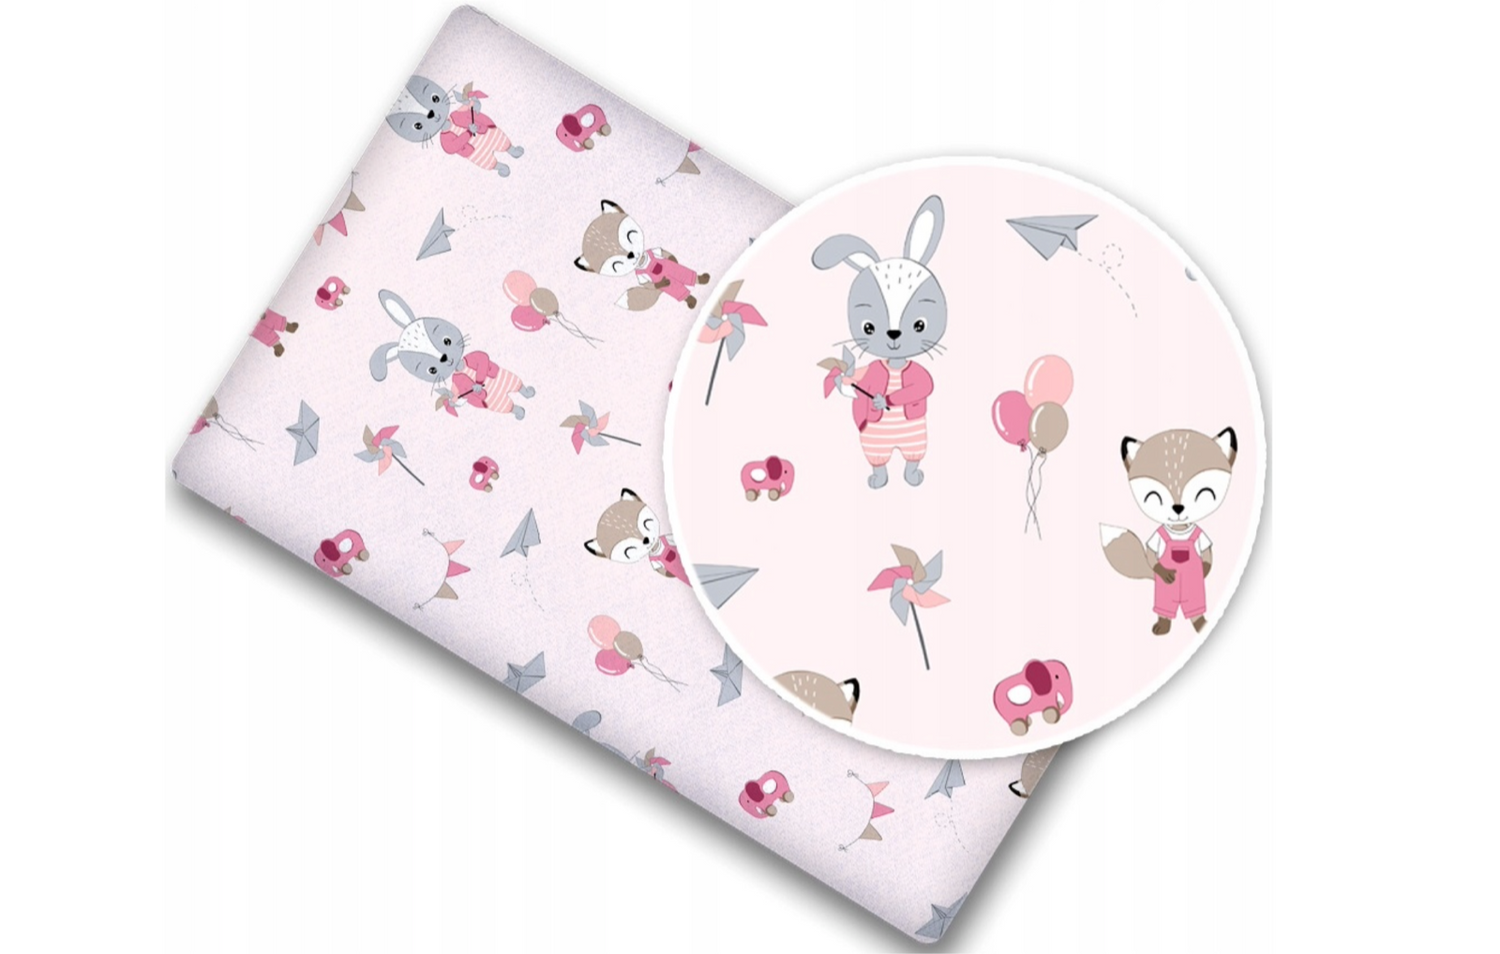 Fitted Sheet Soft Cotton for Baby Cot 120x60cm Fox and Rabbit